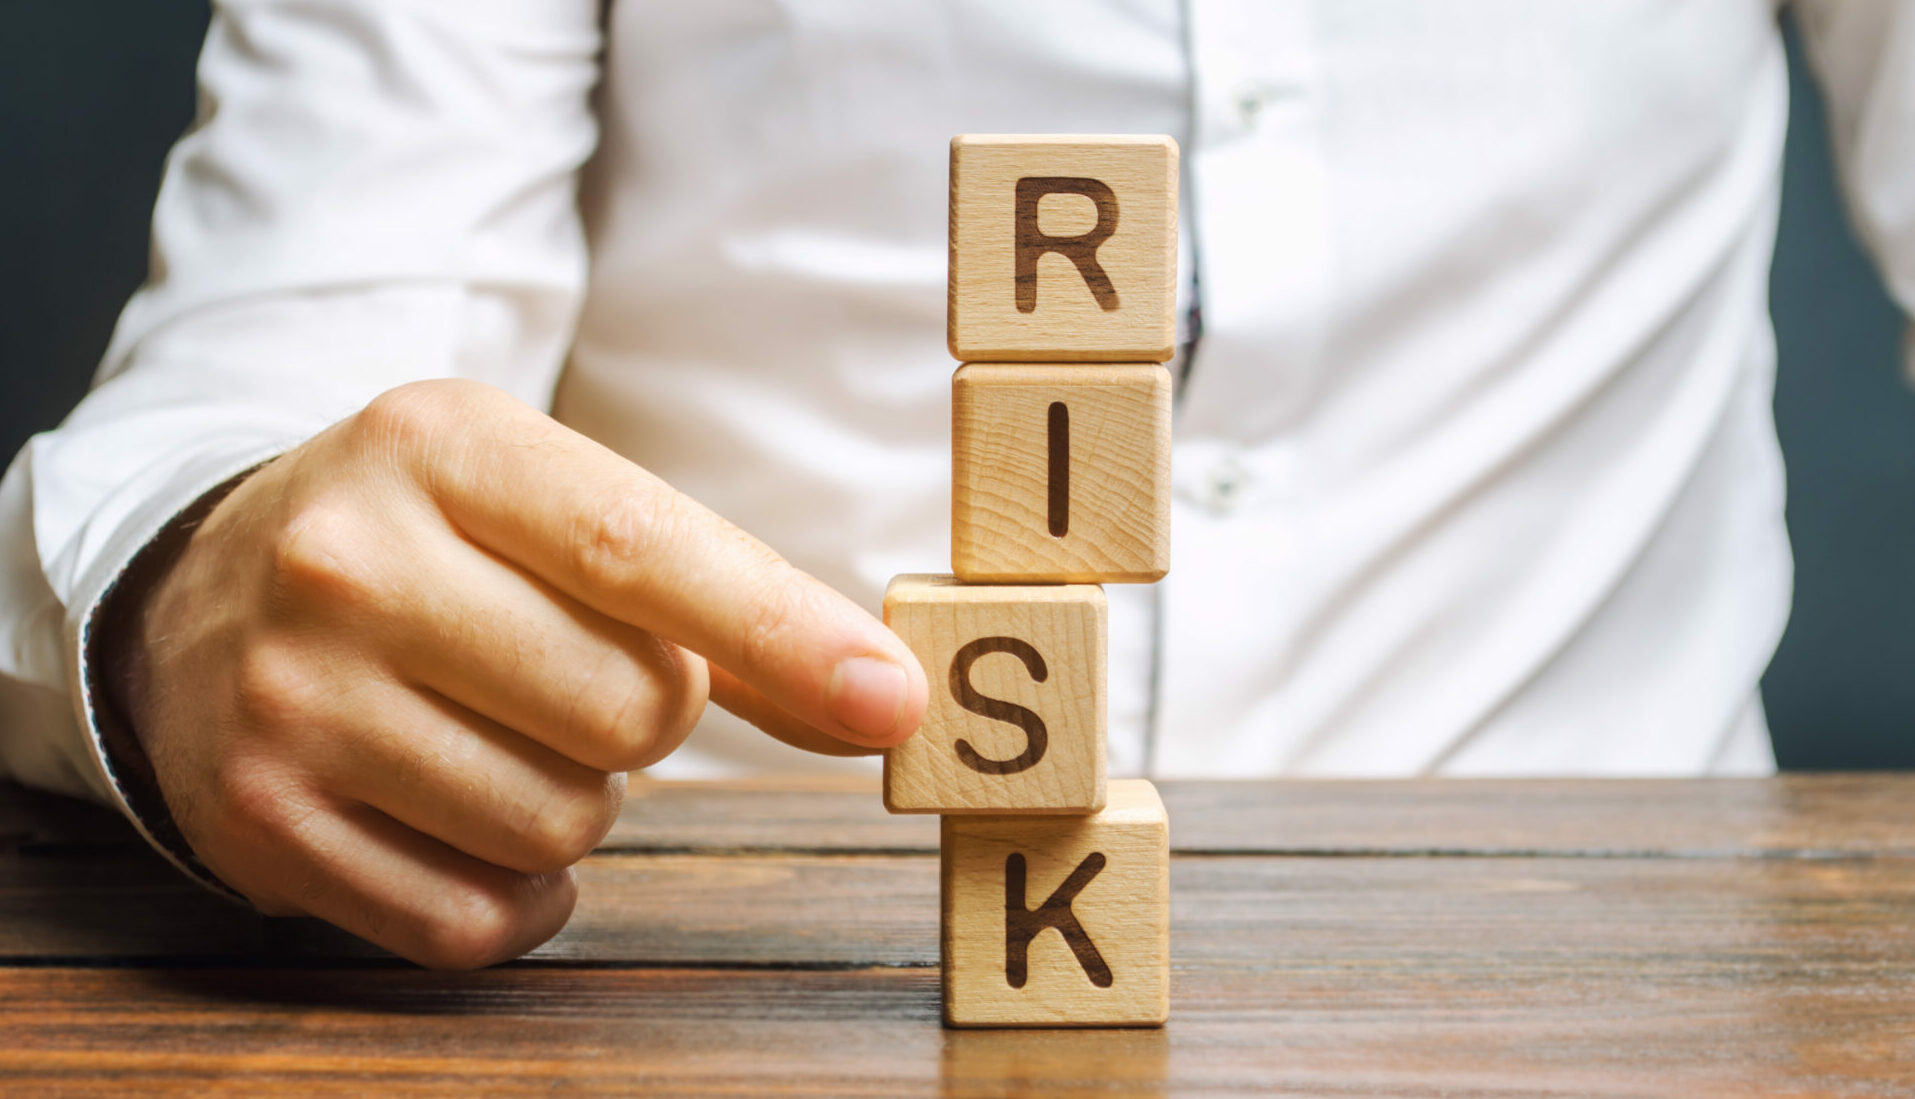 Hand holding a wooden block at the bottom of a stack. The blocks spell out 'RISK'